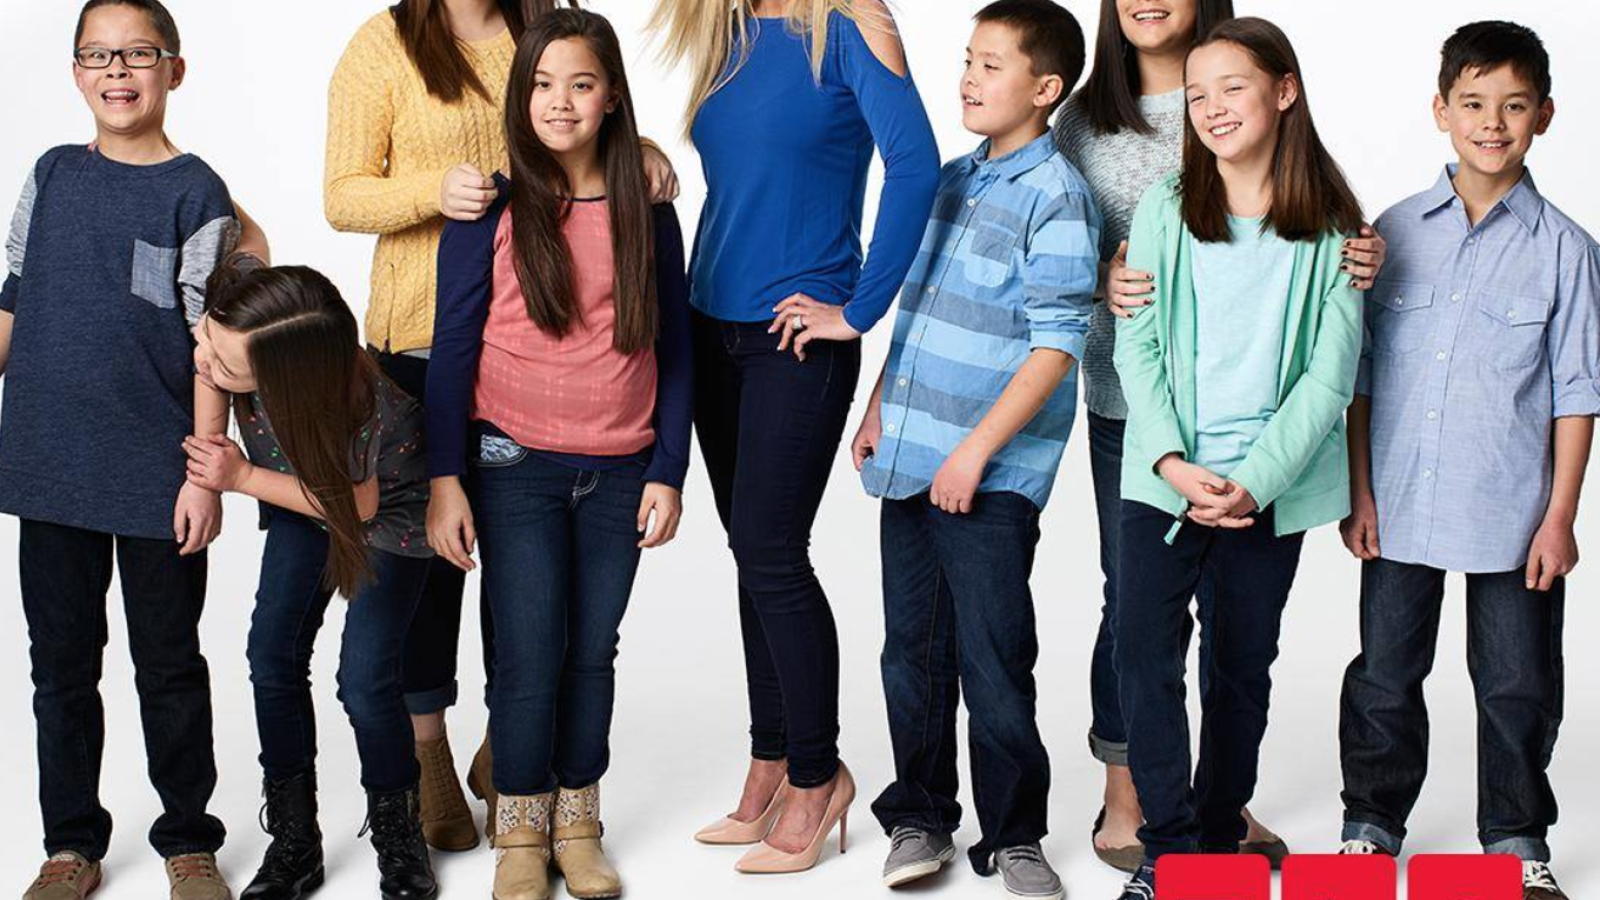 What Really Happened To Collin Gosselin? 'Kate Plus 8' Star